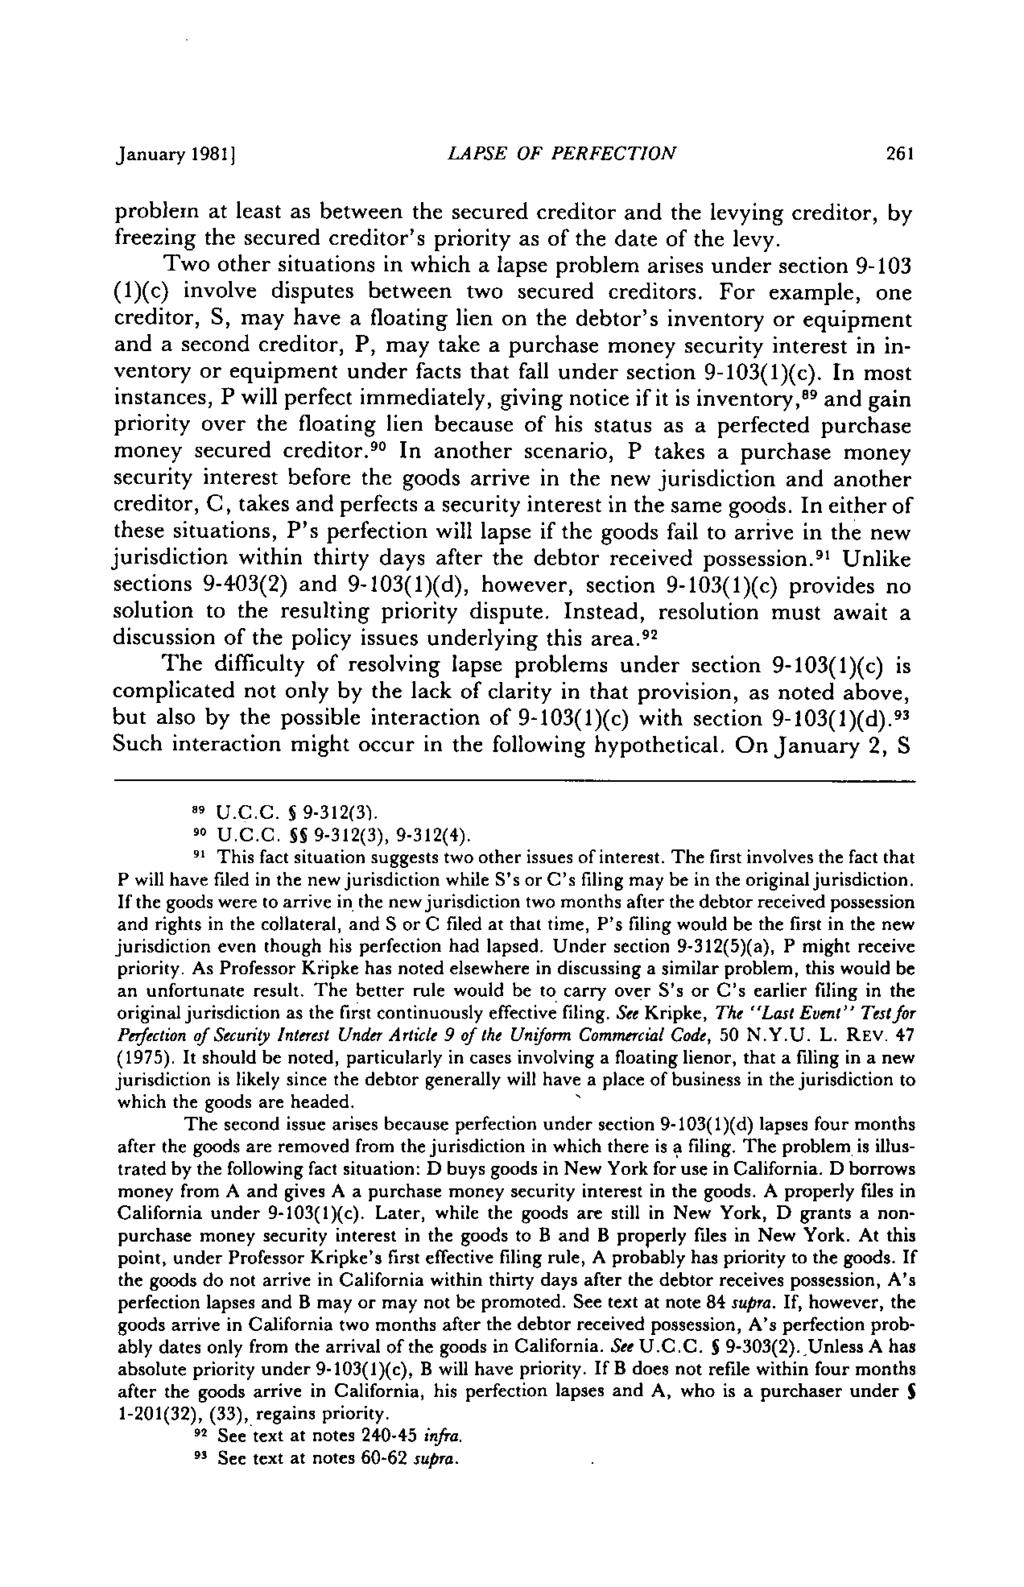 January 19811 LAPSE OF PERFECTION 261 problem at least as between the secured creditor and the levying creditor, by freezing the secured creditor's priority as of the date of the levy.